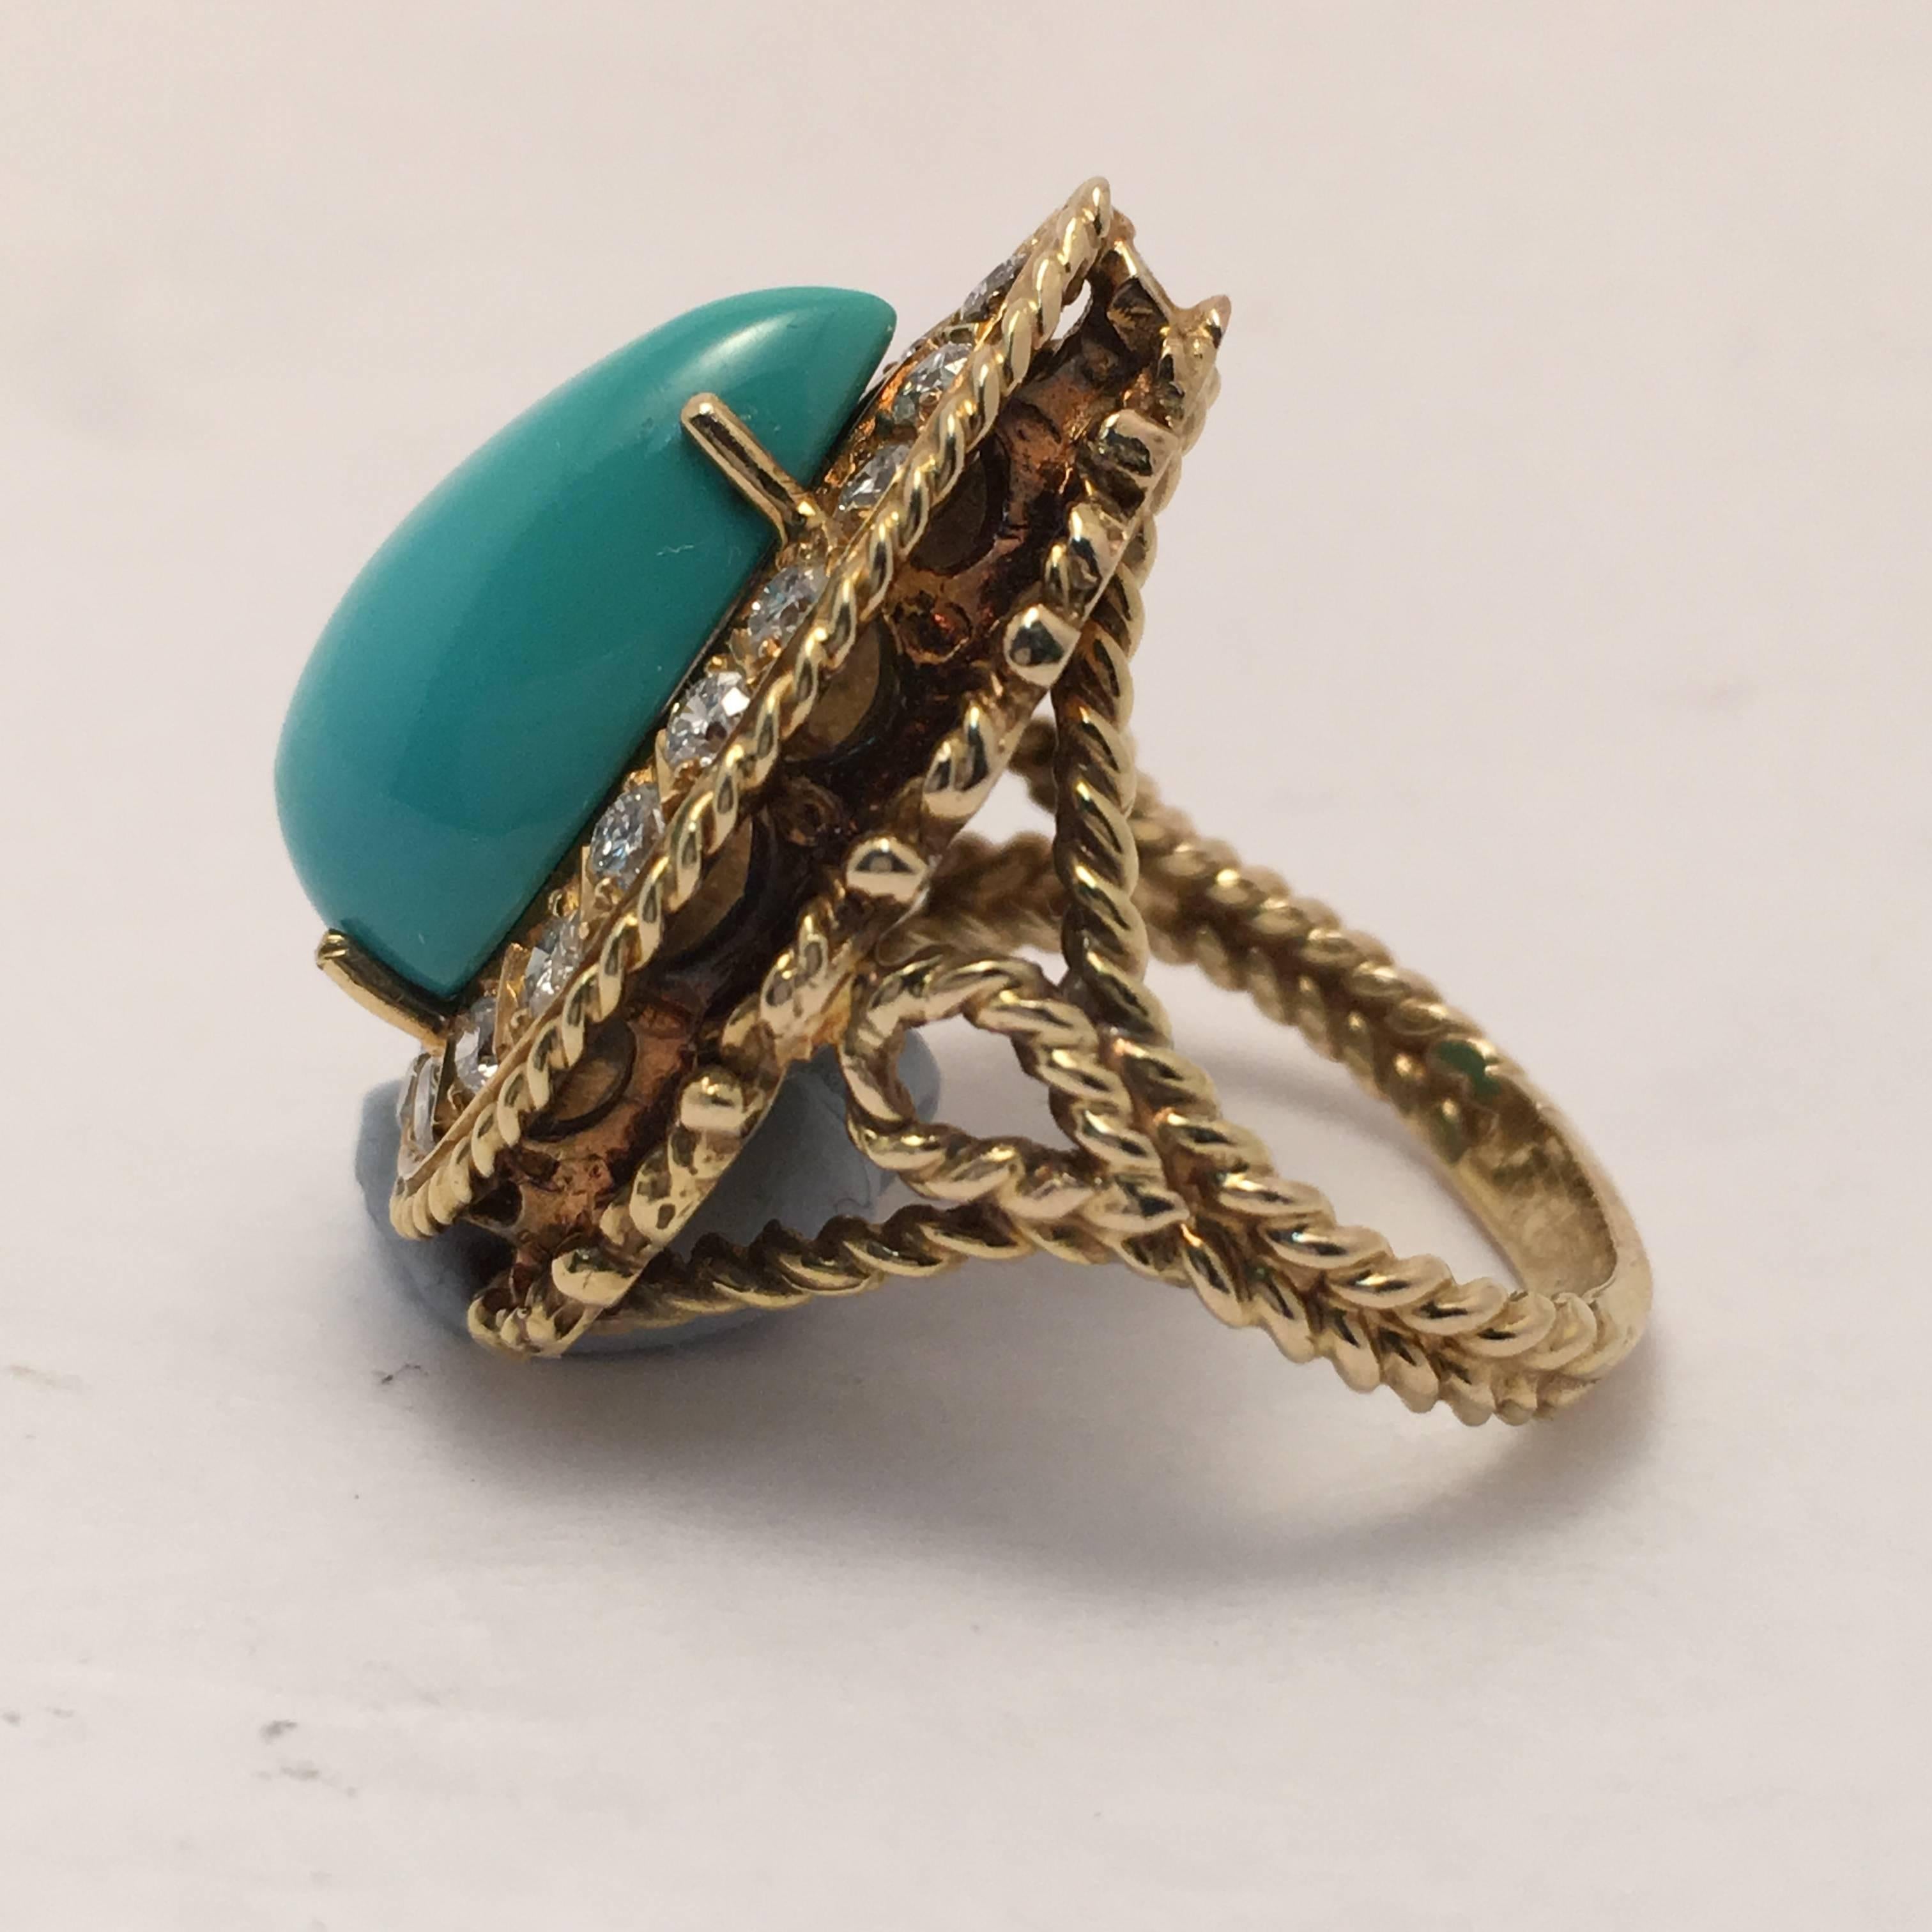 This 14 Kt. yellow gold ring is set with one pear shape Persian  turquoise and 19  full cut  diamonds weighing approximately .65 ct. total weight.  The mounting is of rope design and can be easily sized for any finger.  